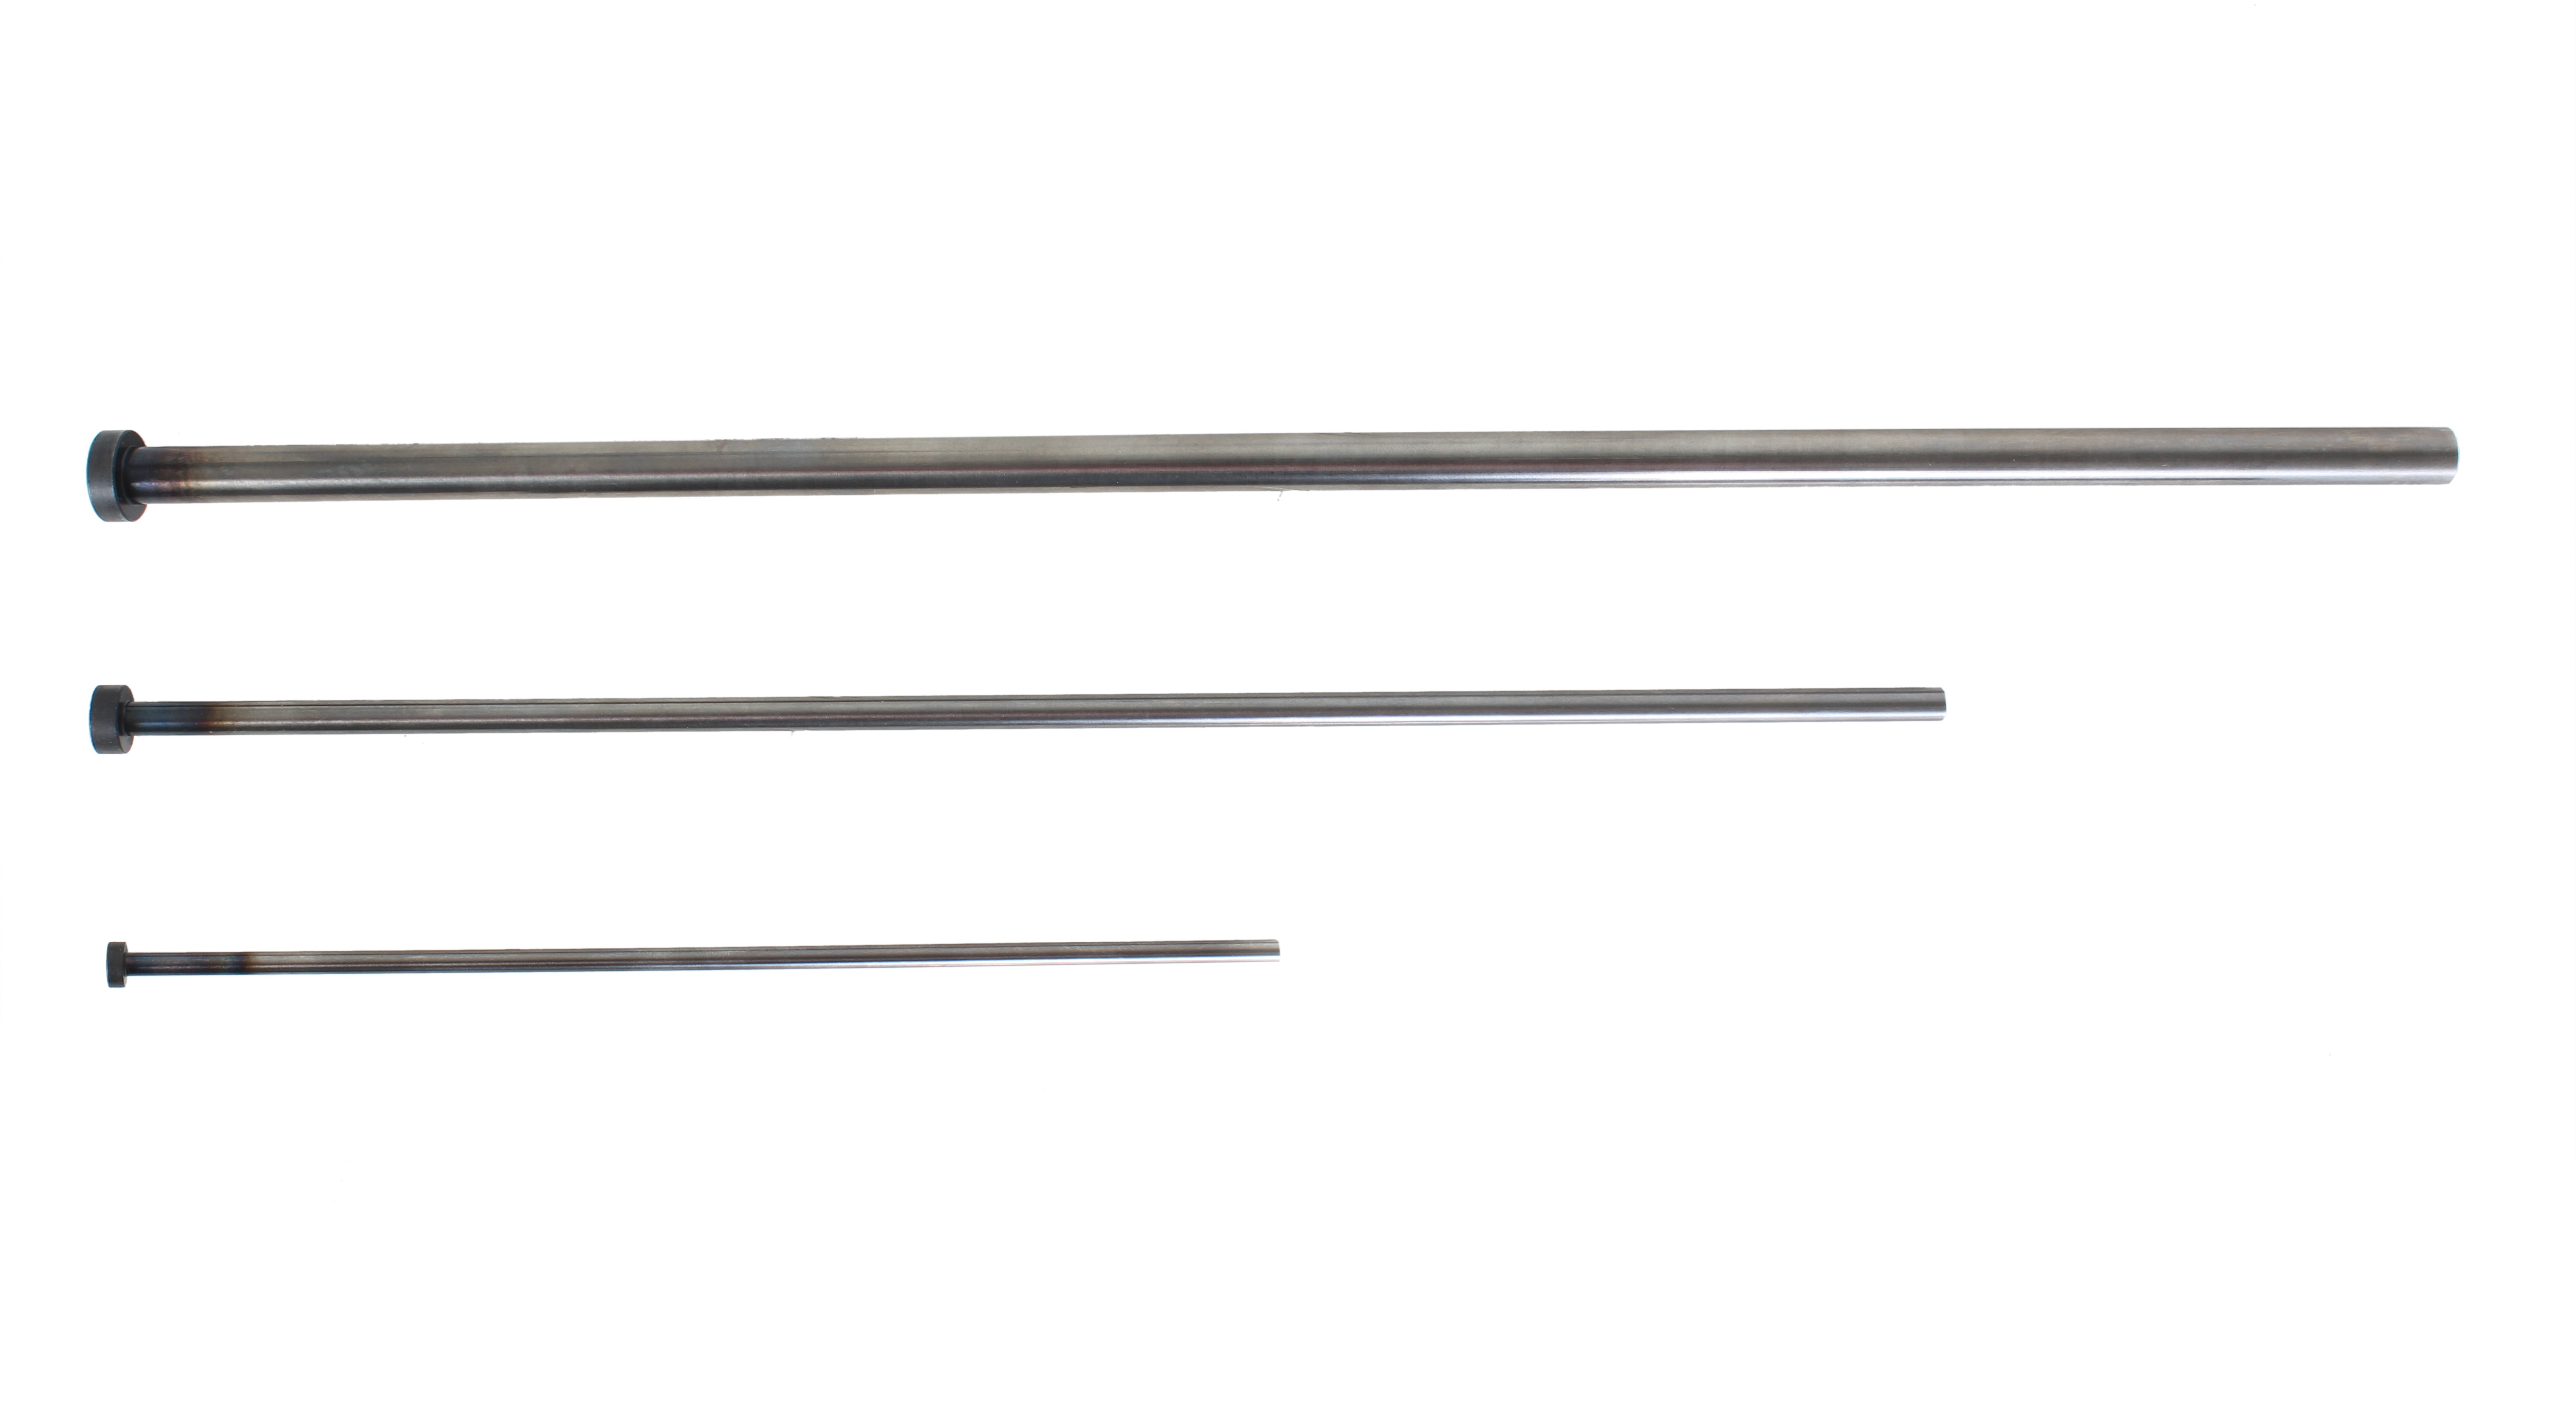 STRAIGHT EJECTOR PINS -DIN Type/SKD61 equivalent+Nitrided/Standard- (D-EPN10-160) 